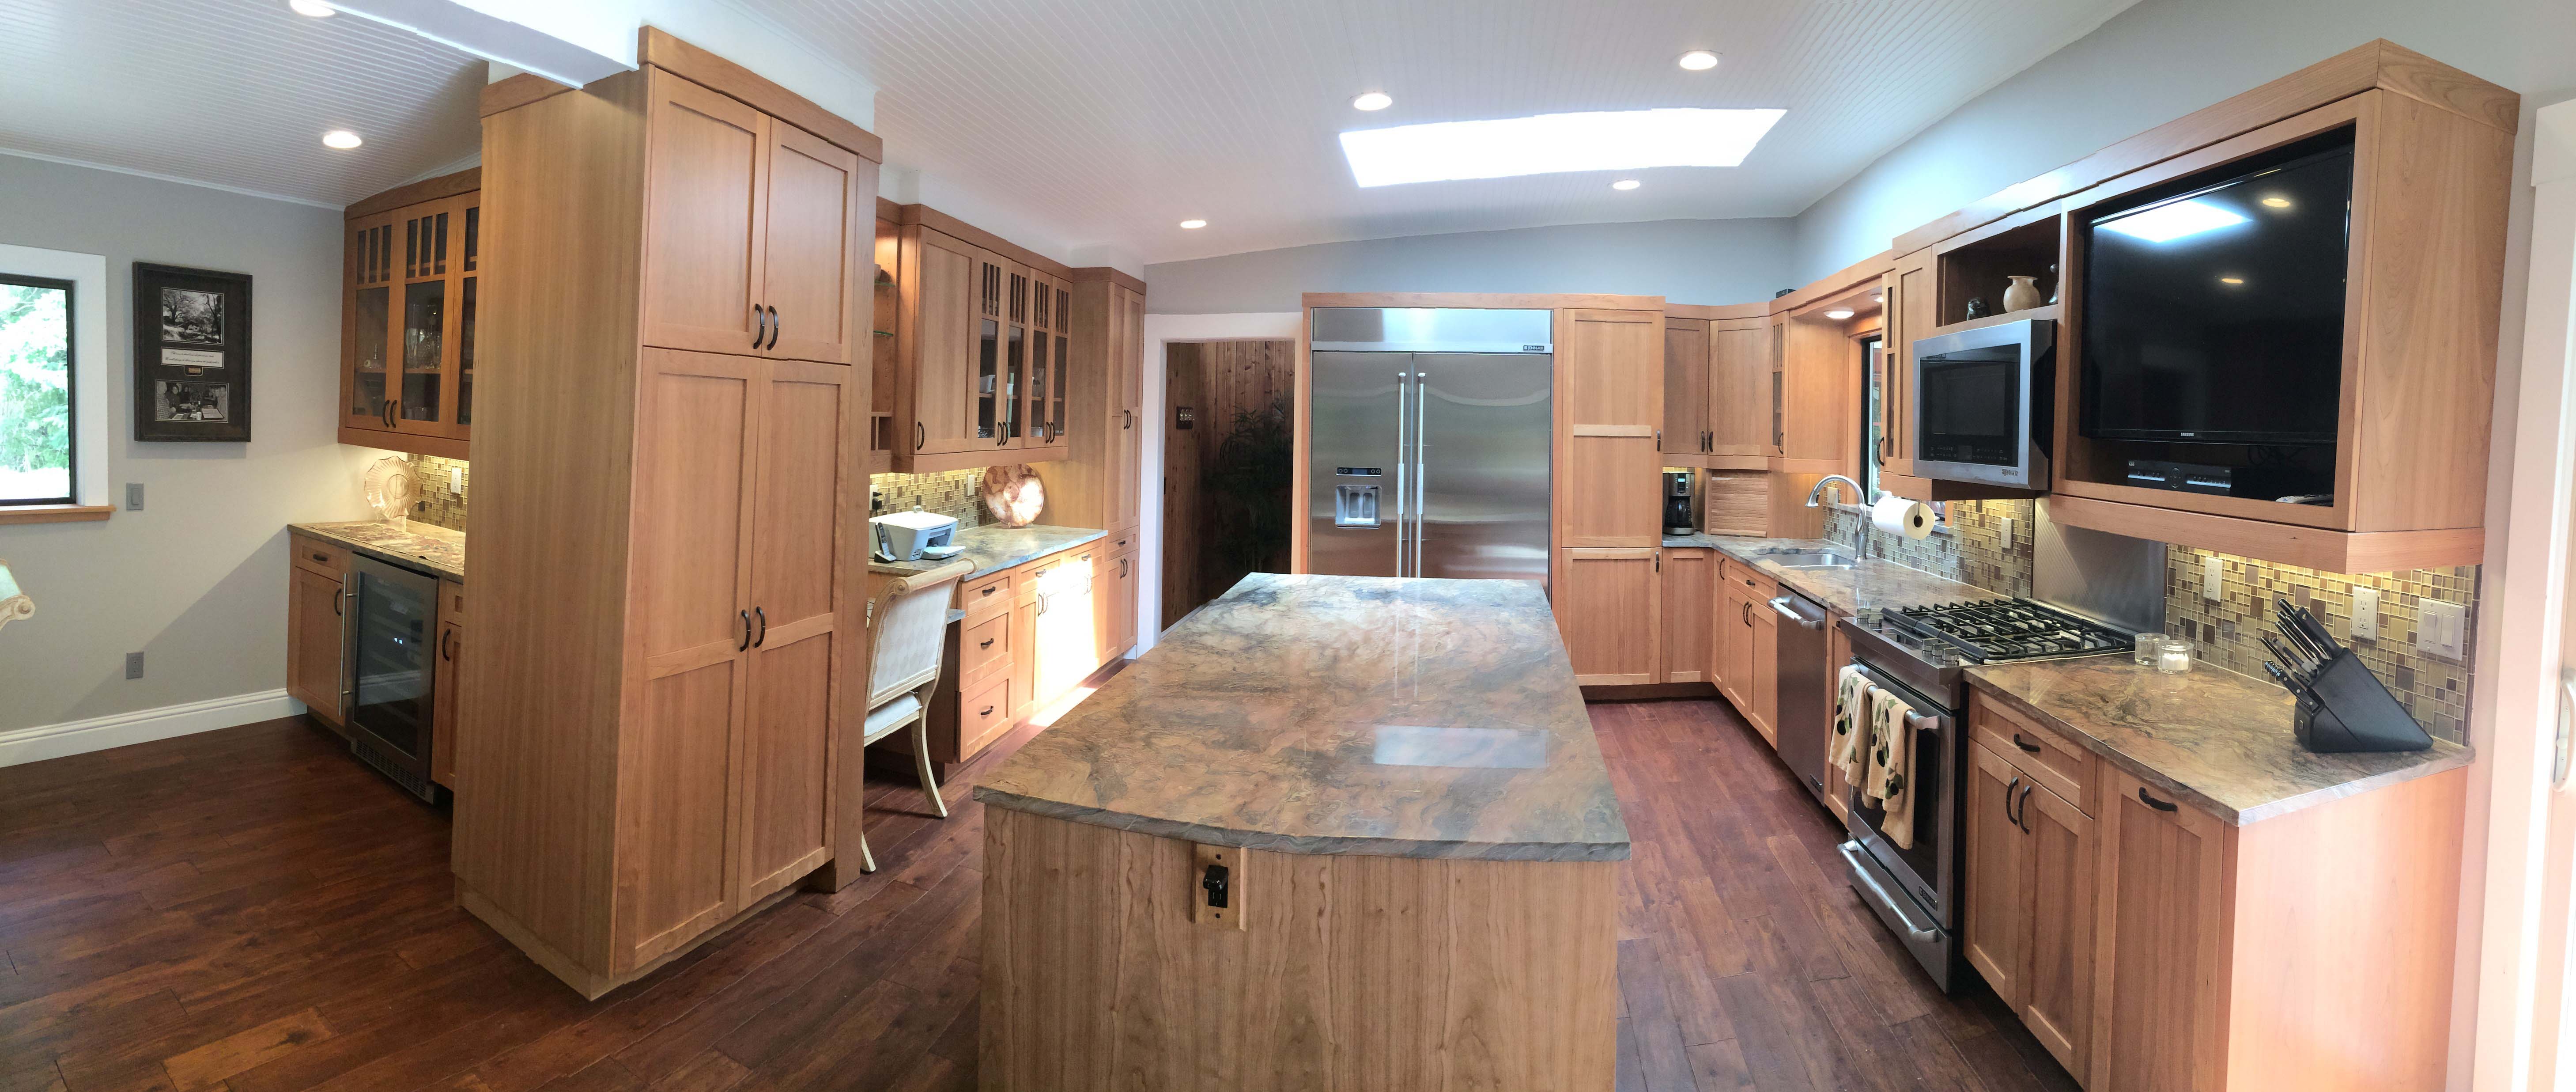 Custom Chef's Kitchen featuring marble kitchen island and marble countertops.